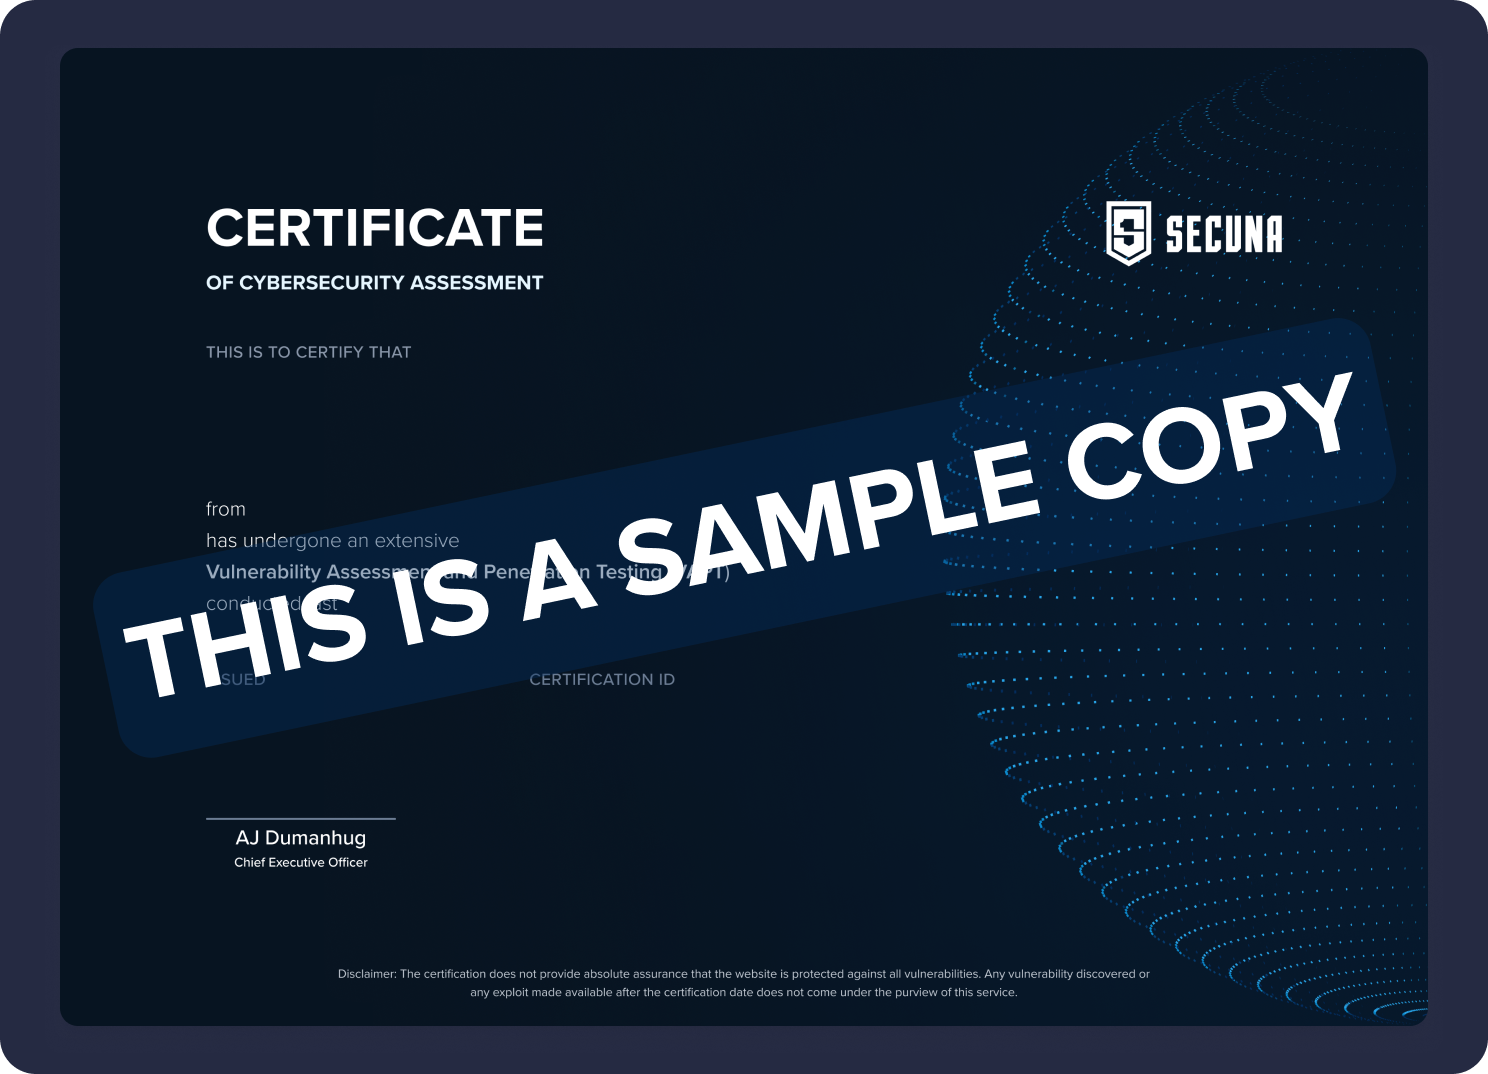 Get a Digital Certificate of Cybersecurity Assessment